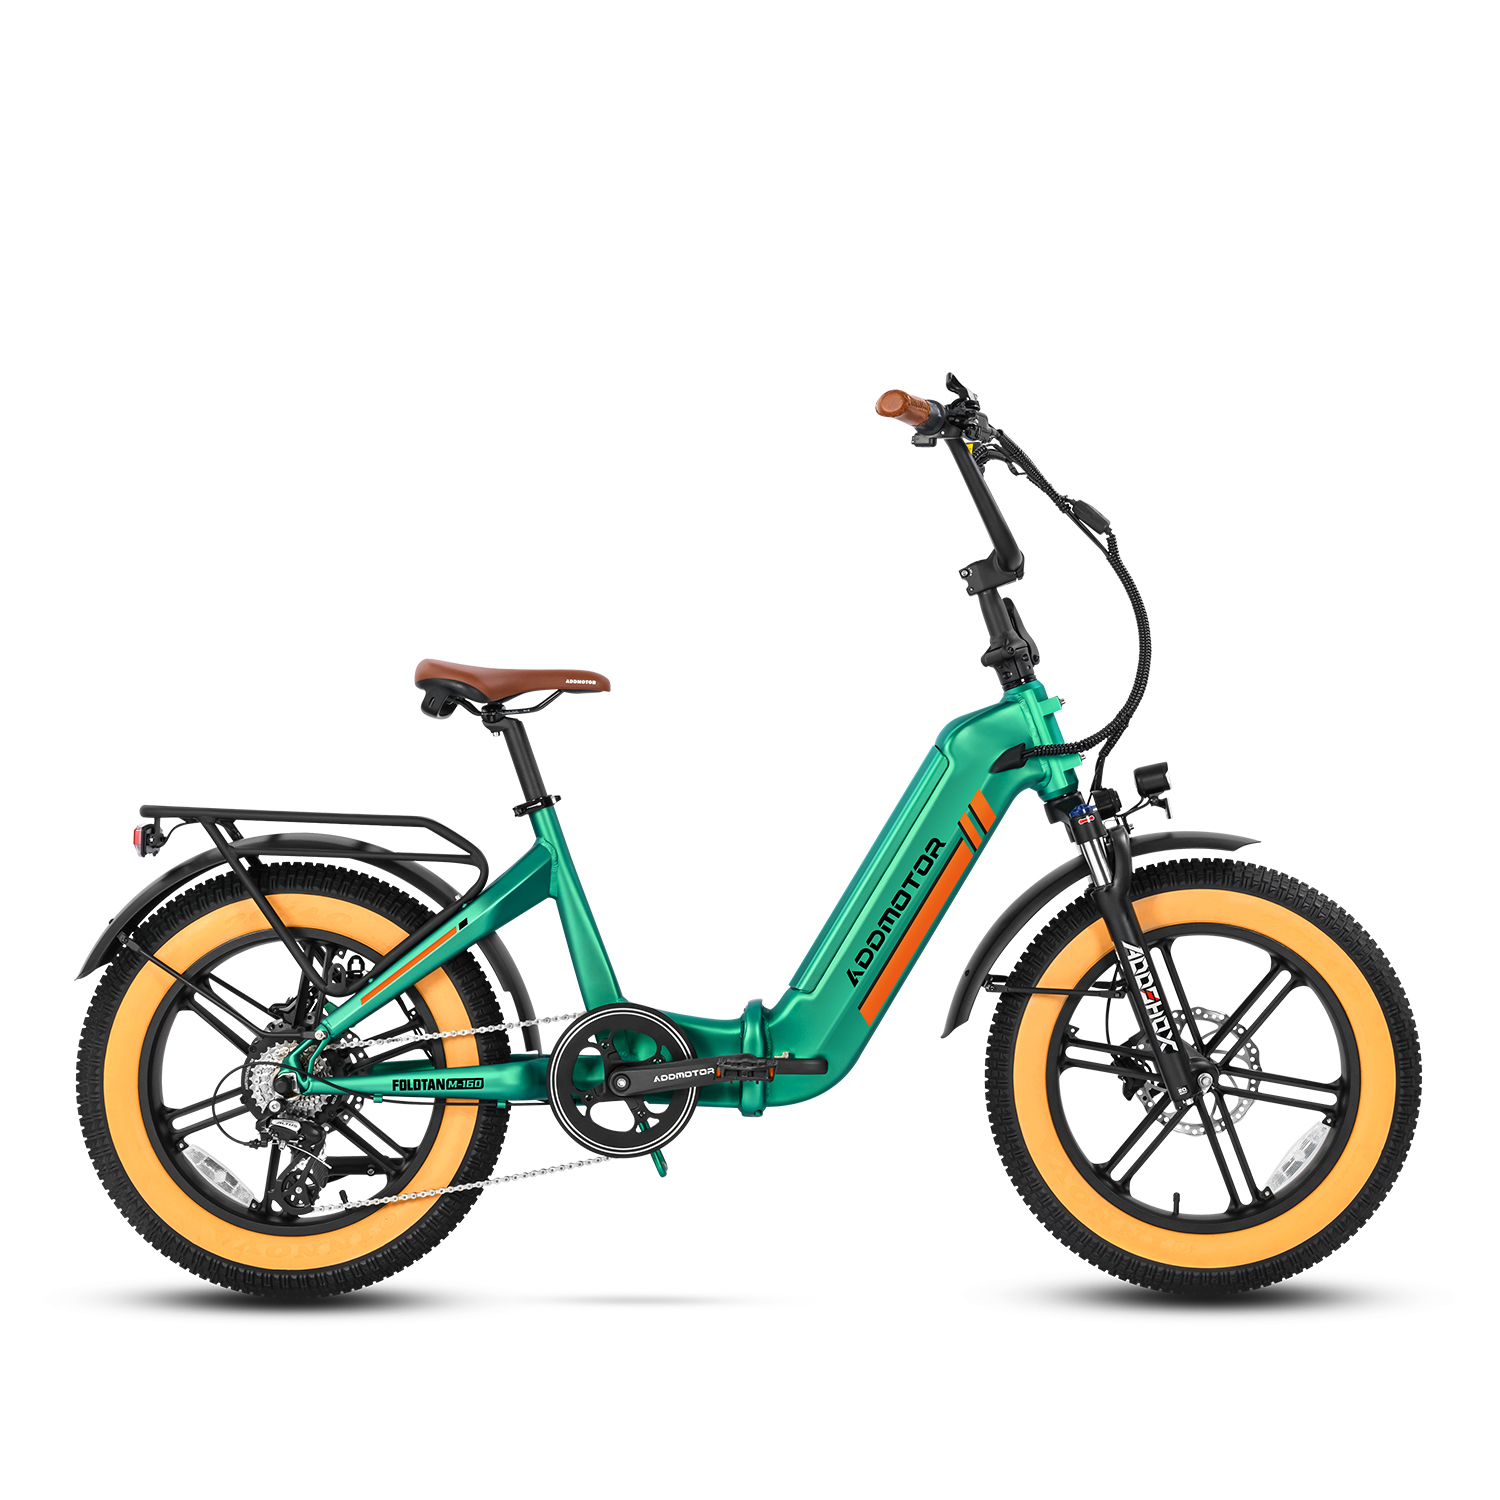 Addmotor 24 In. Electric Bicycle, 750W Step-Thru Fat Tire Electric Bike,  Pedal Assist Cruiser City Ebike for Adults, Shimano 7 Speed, 28MPH, M-430